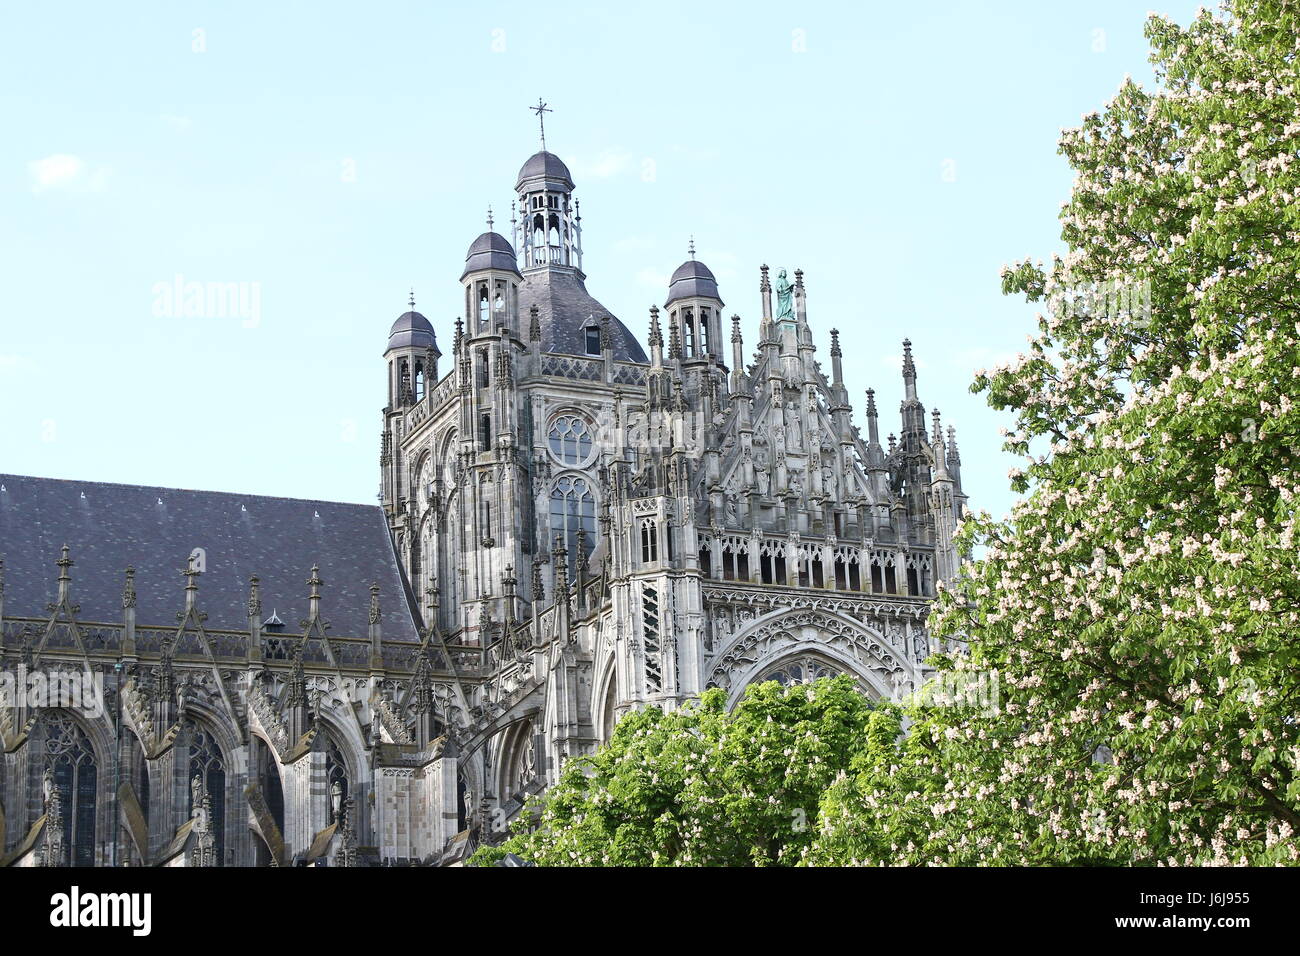 Medieval Sint-Janskathedraal (St. John's Cathedral). City of  Den Bosch, Brabant, Netherlands, seen from Parade square. Brabantine Gothic style Stock Photo